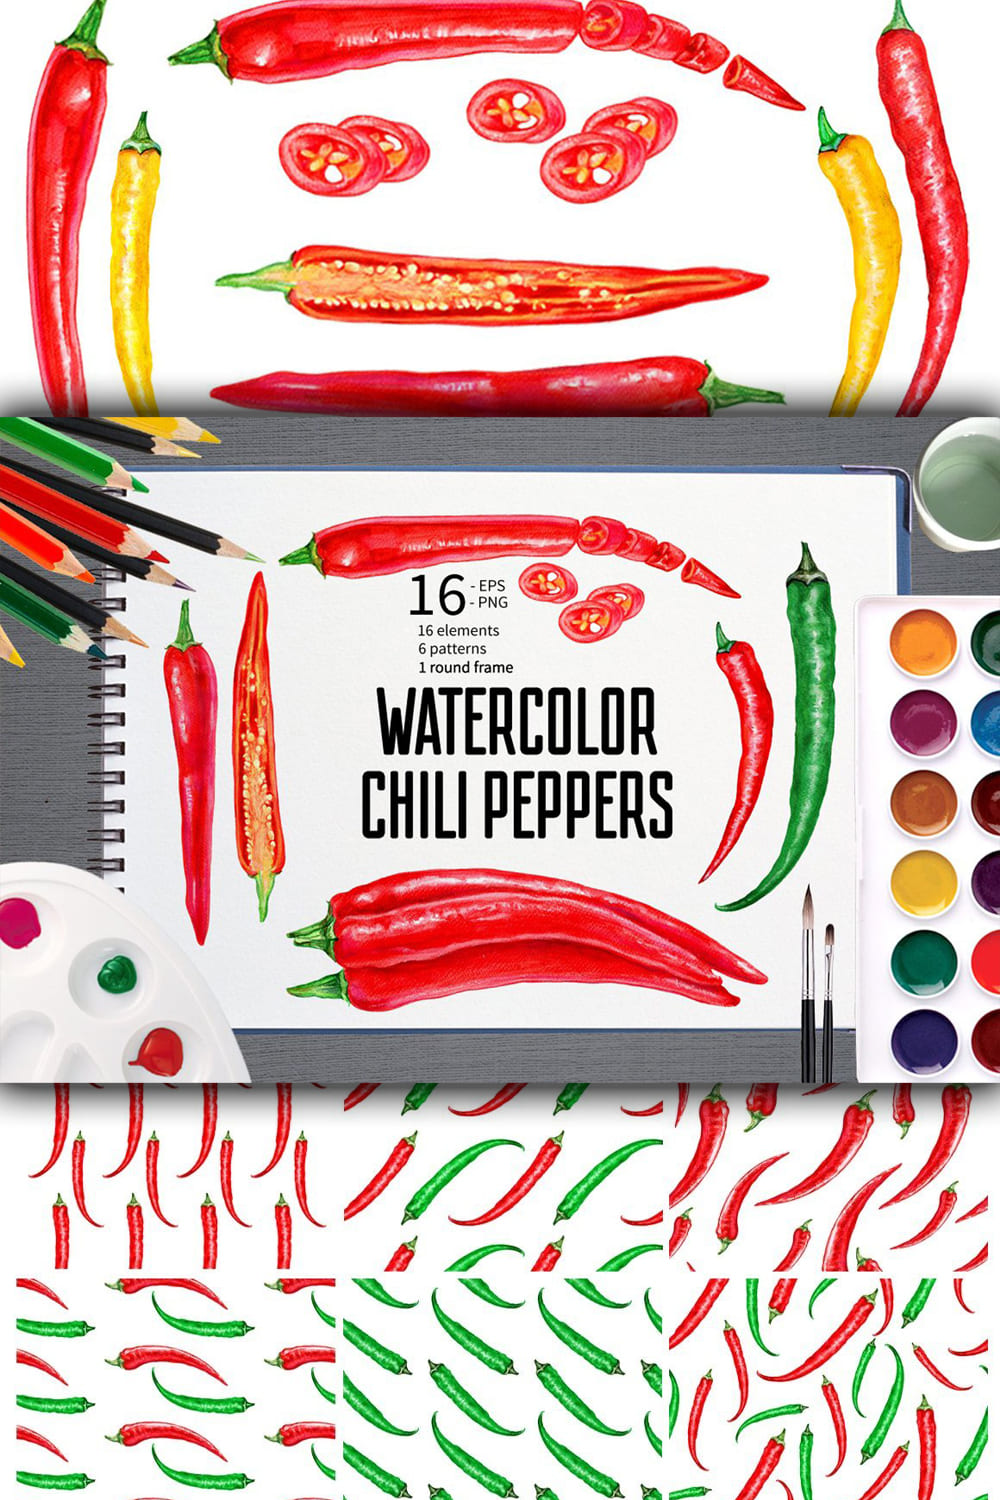 938300 watercolor chilli peppers collection pinterest 1000 1500